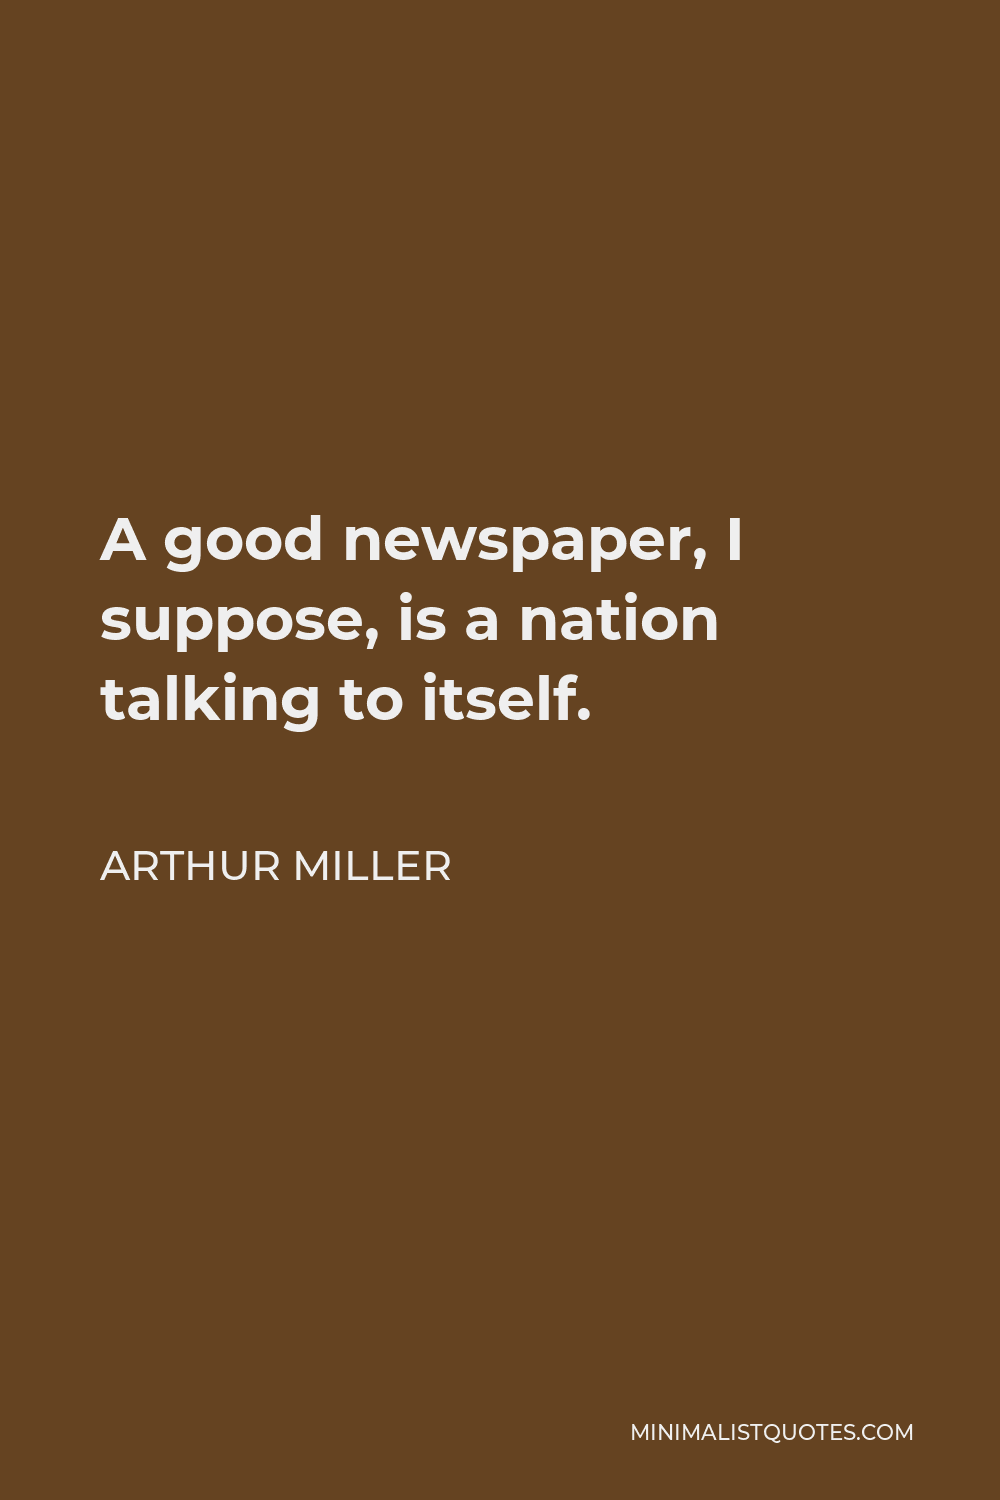 Arthur Miller Quote - A good newspaper, I suppose, is a nation talking to itself.